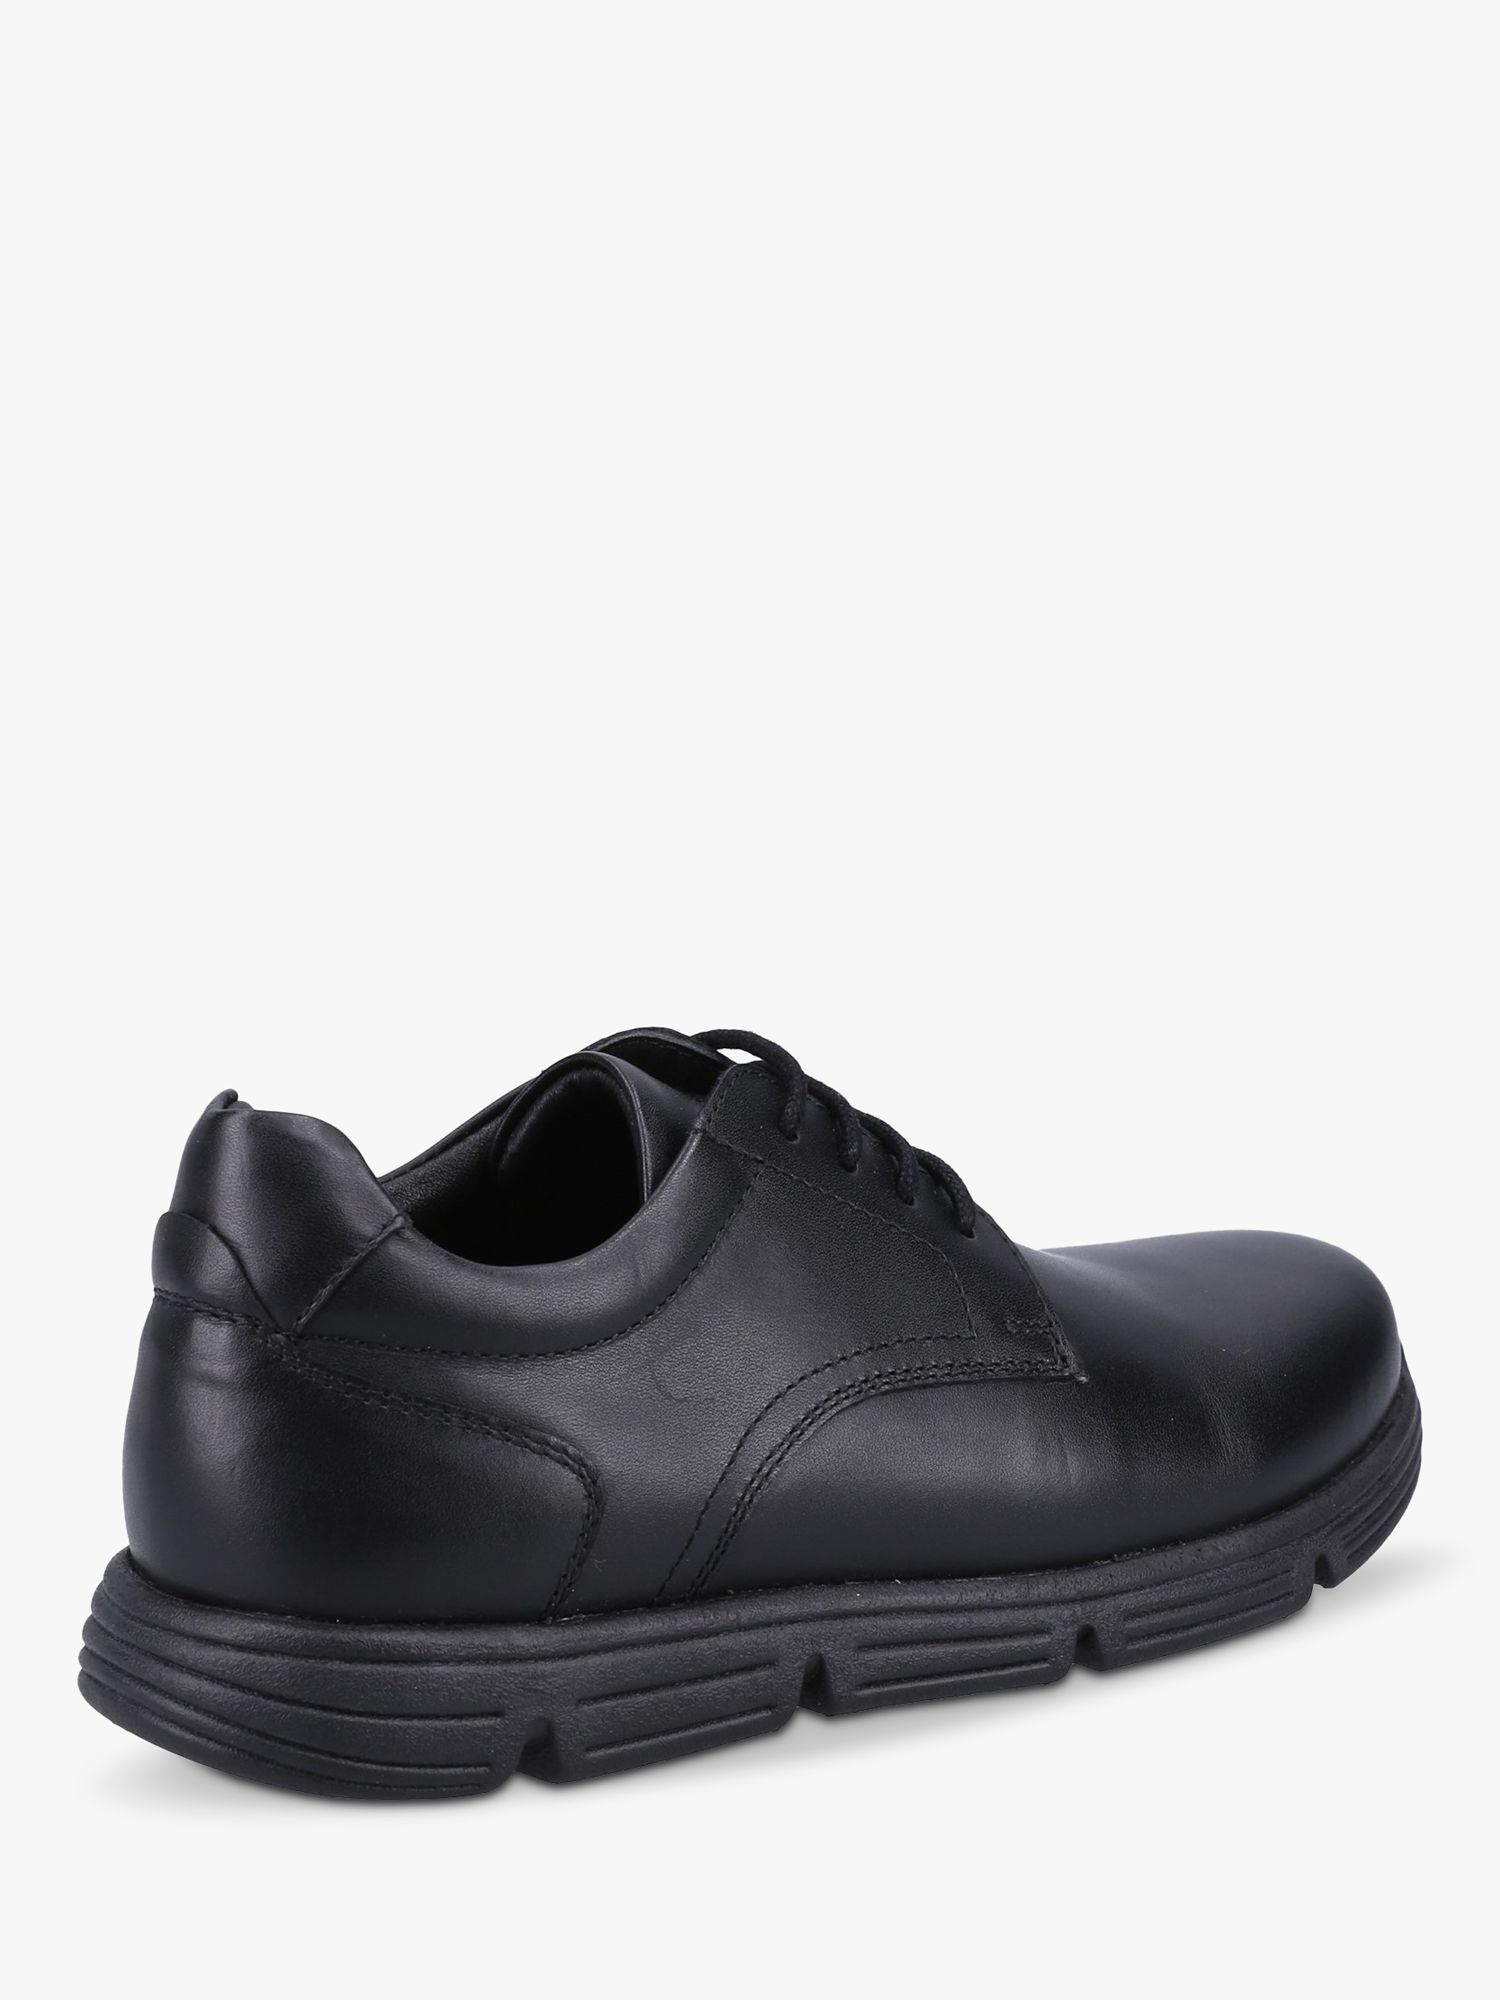 Buy Hush Puppies Kids' Adrian Leather Lace-Up Shoes, Black Online at johnlewis.com